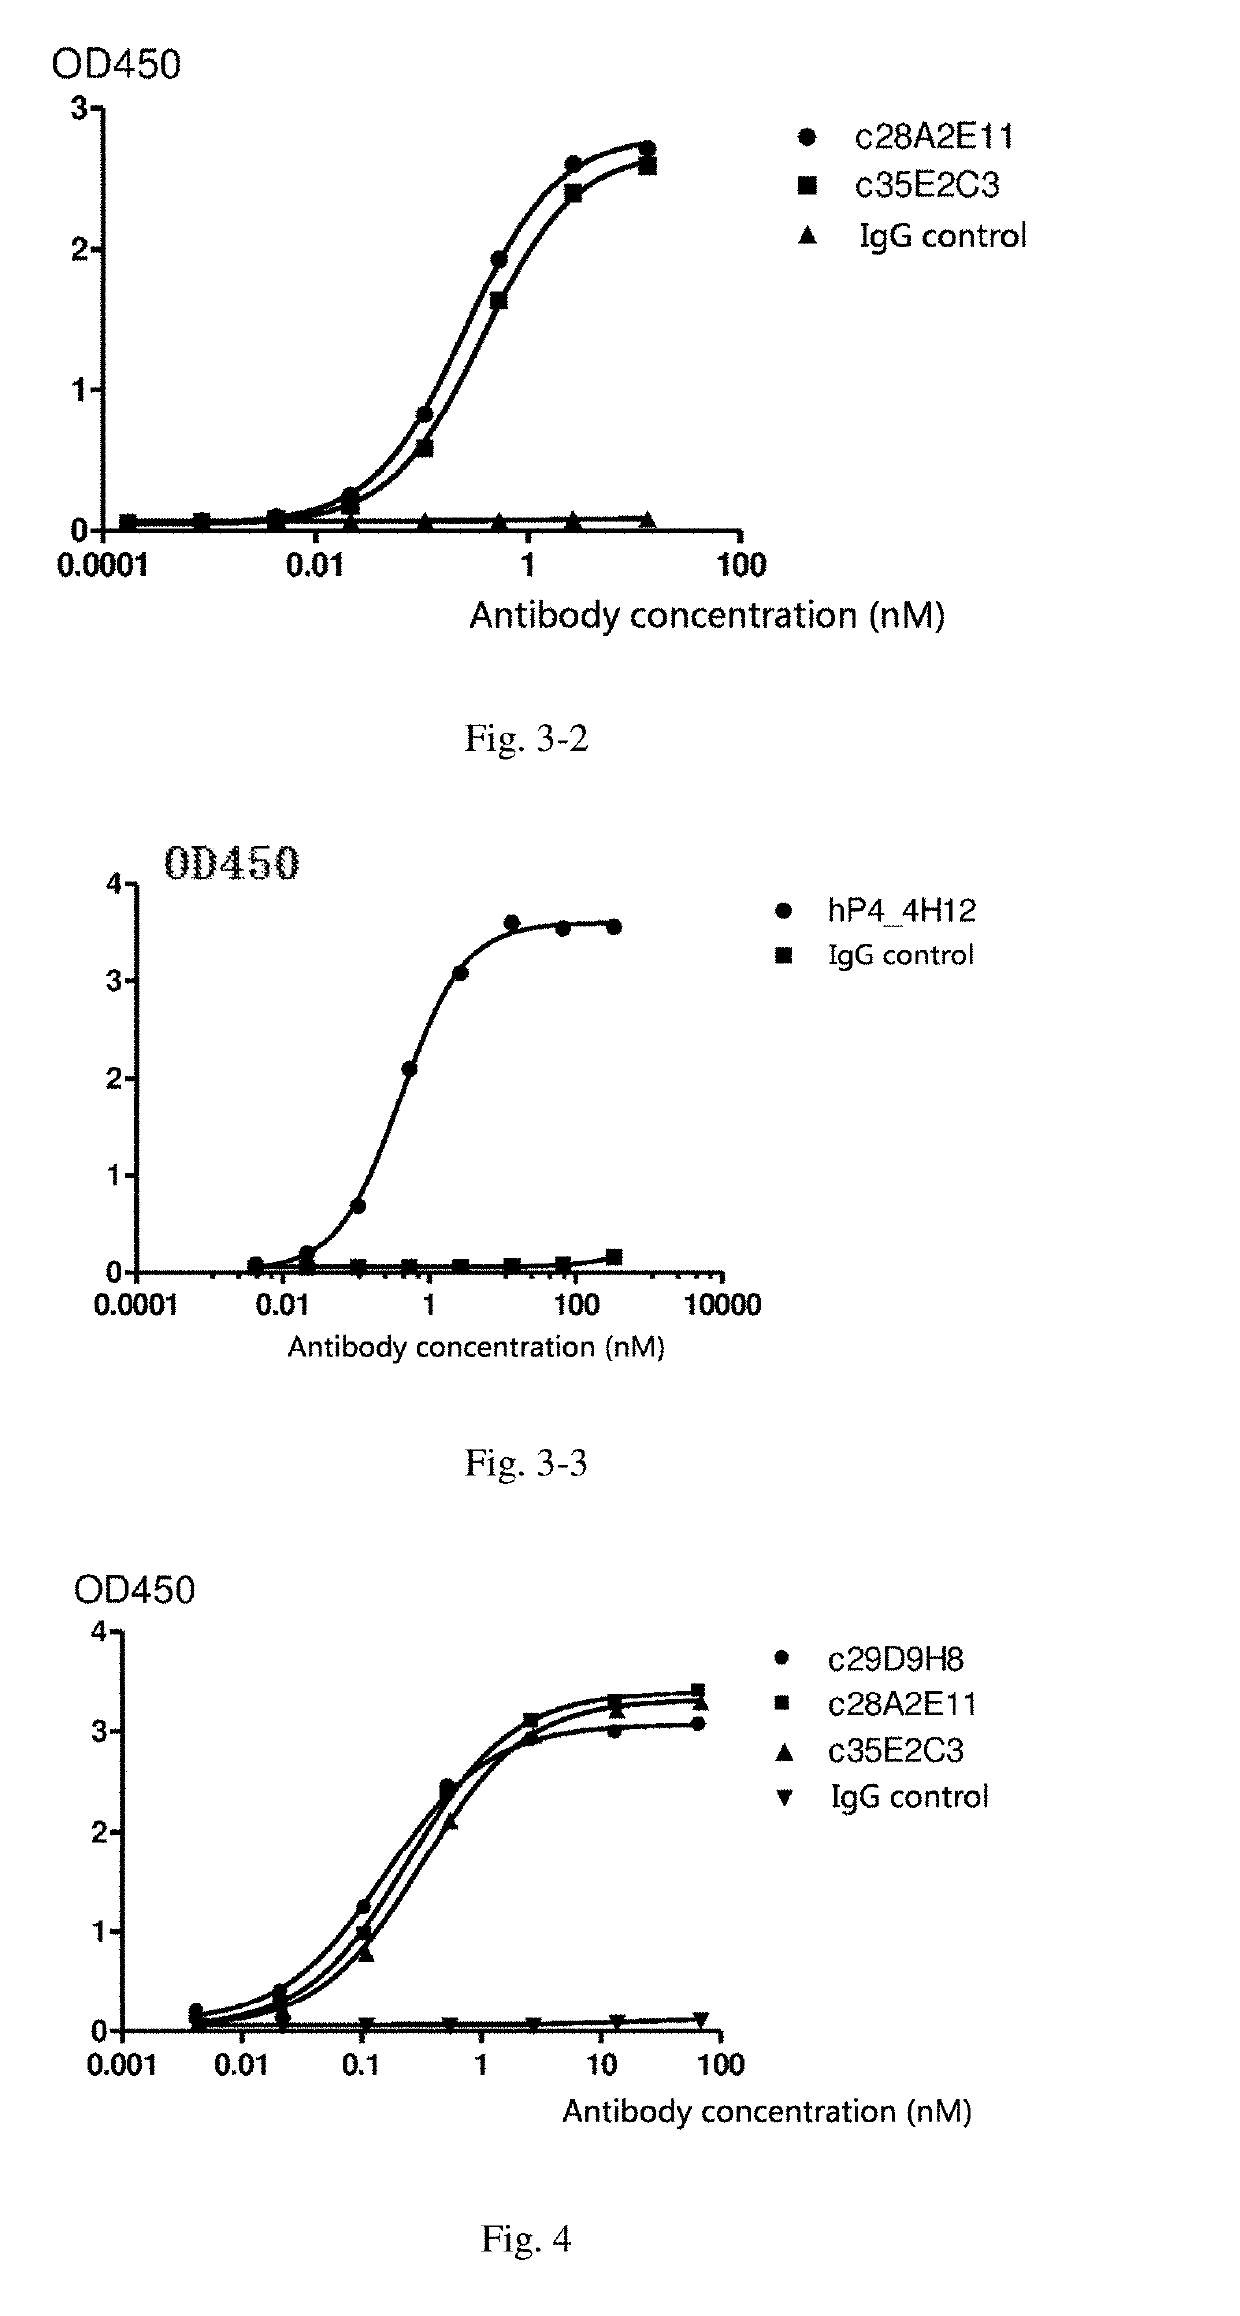 Il-13 antibody and preparation method and use thereof